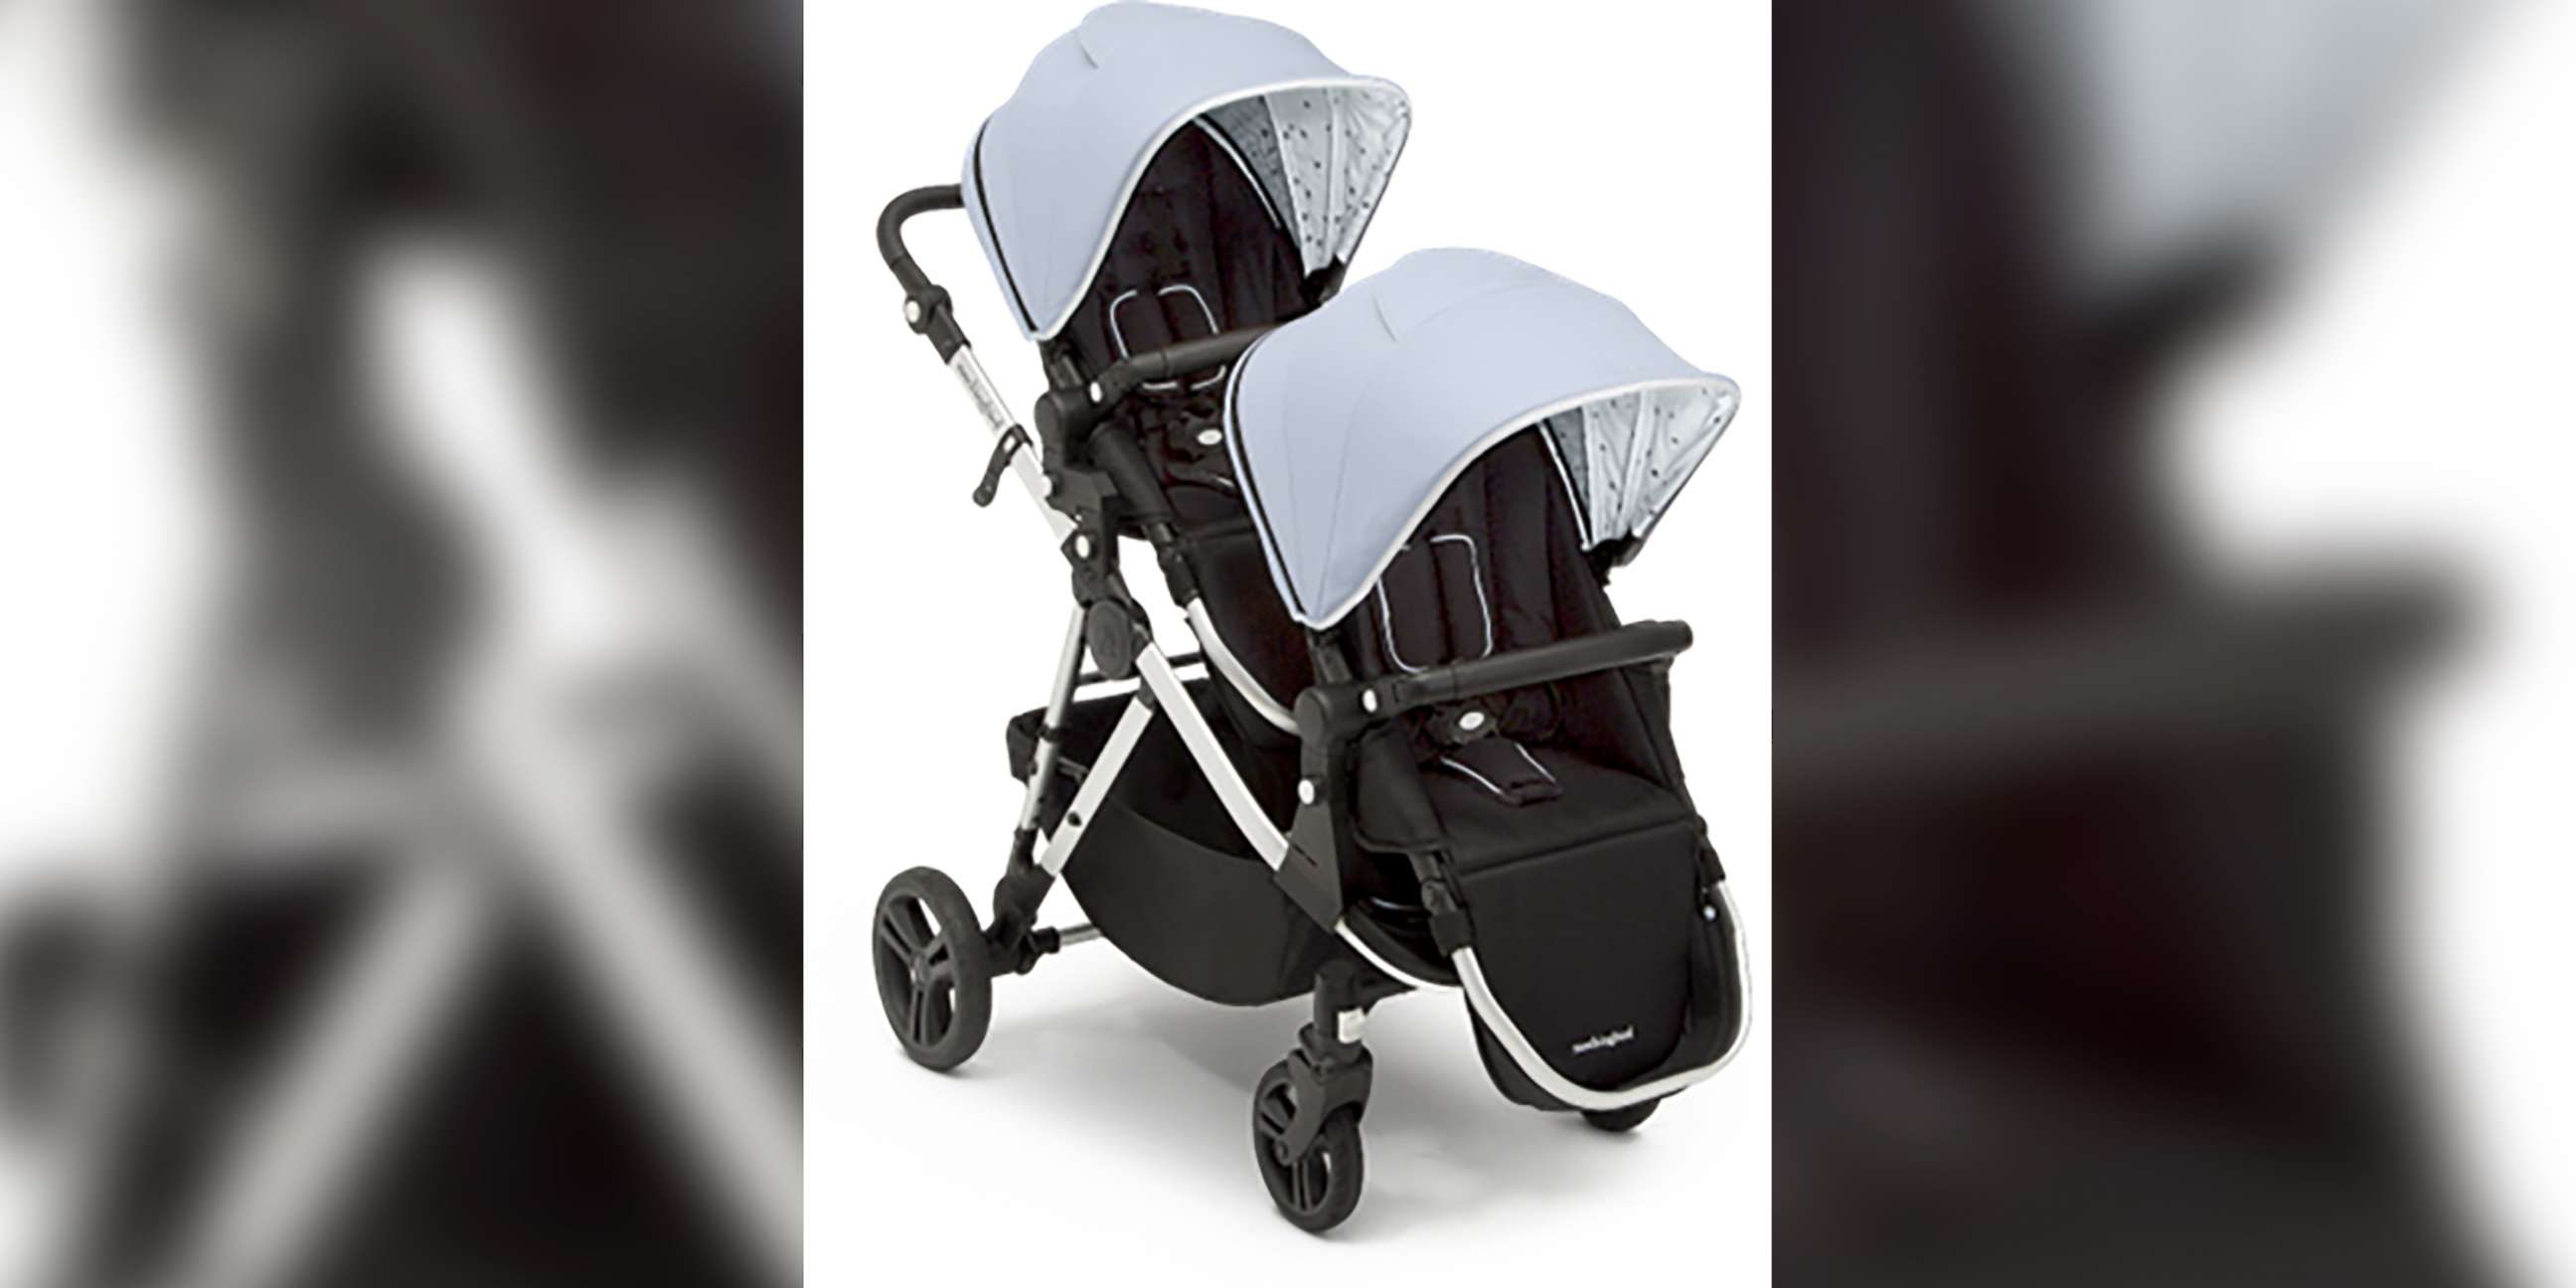 PHOTO: Some of Mockingbird's single-to-double strollers have been recalled due to a fall hazard.